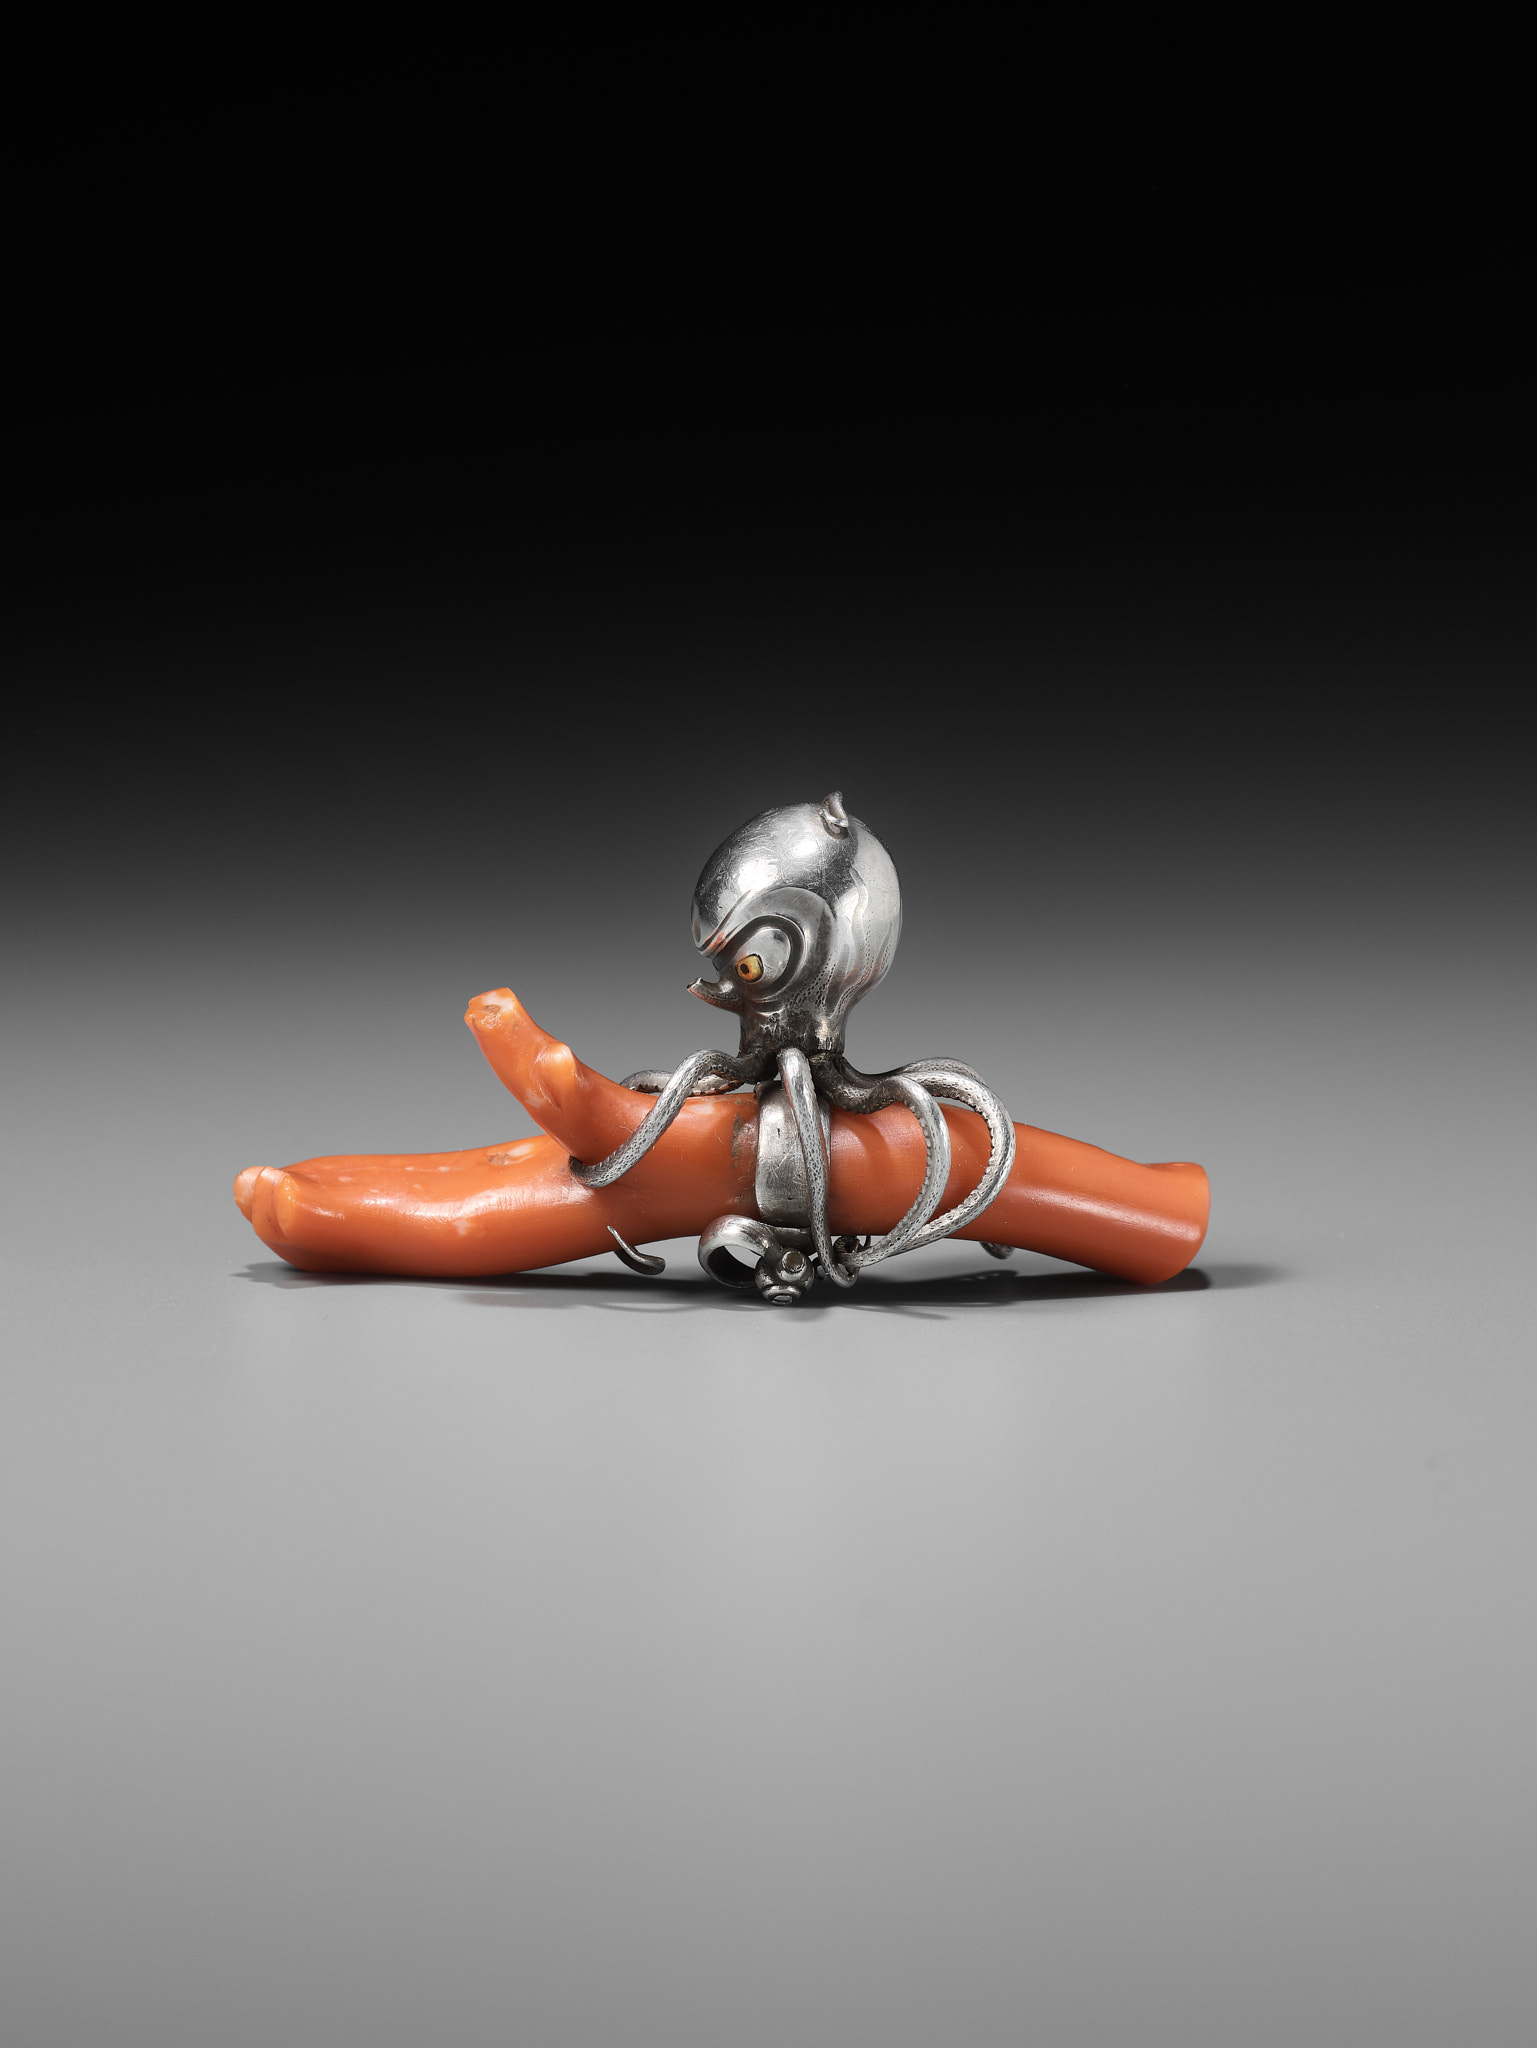 MINKOKU: A LARGE SILVER NETSUKE OF AN OCTOPUS GRASPING A PIECE OF CORAL - Image 7 of 14